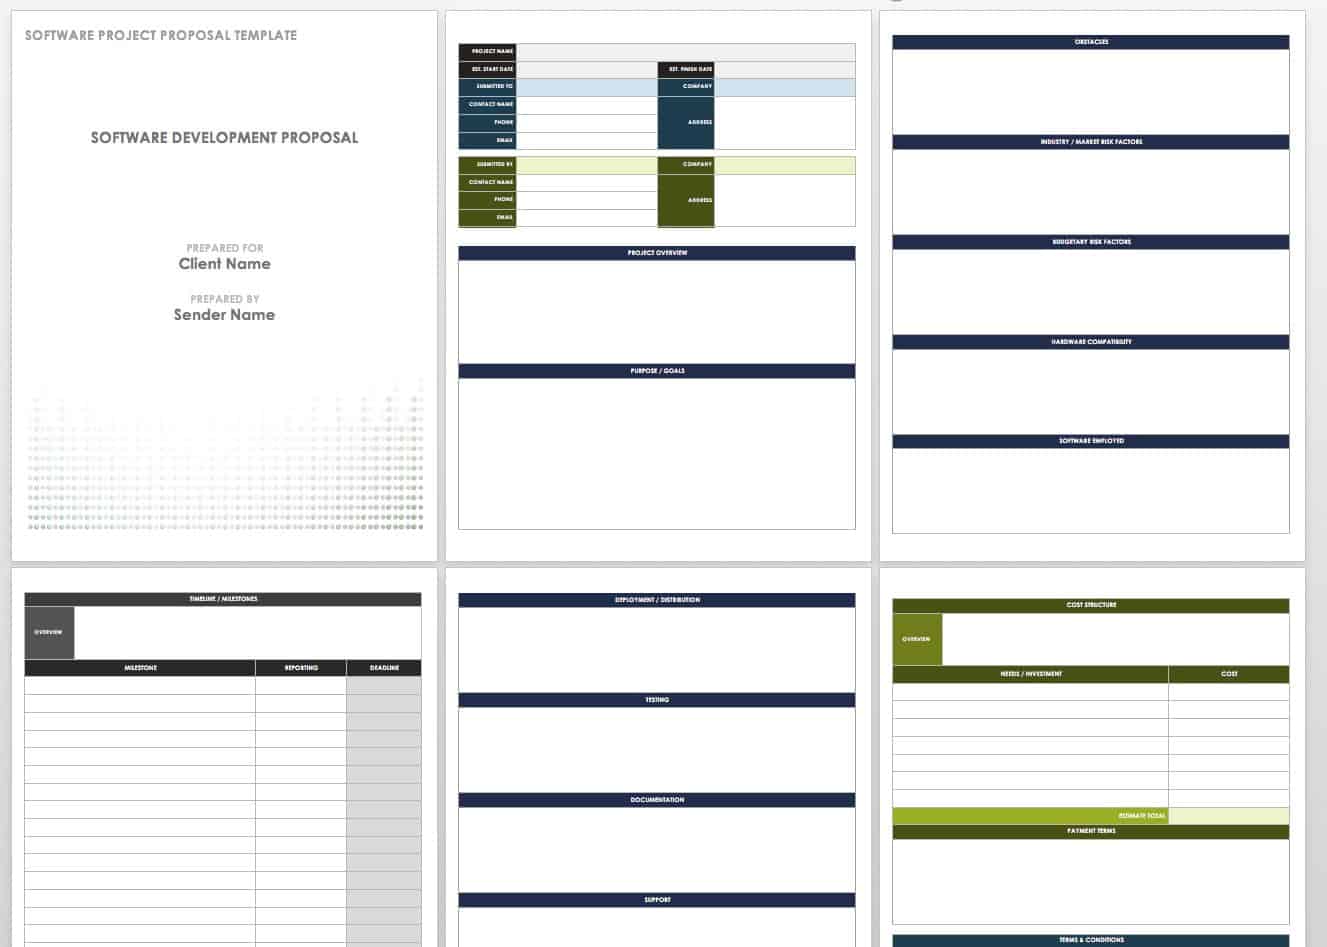 17 Free Project Proposal Templates + Tips | Smartsheet